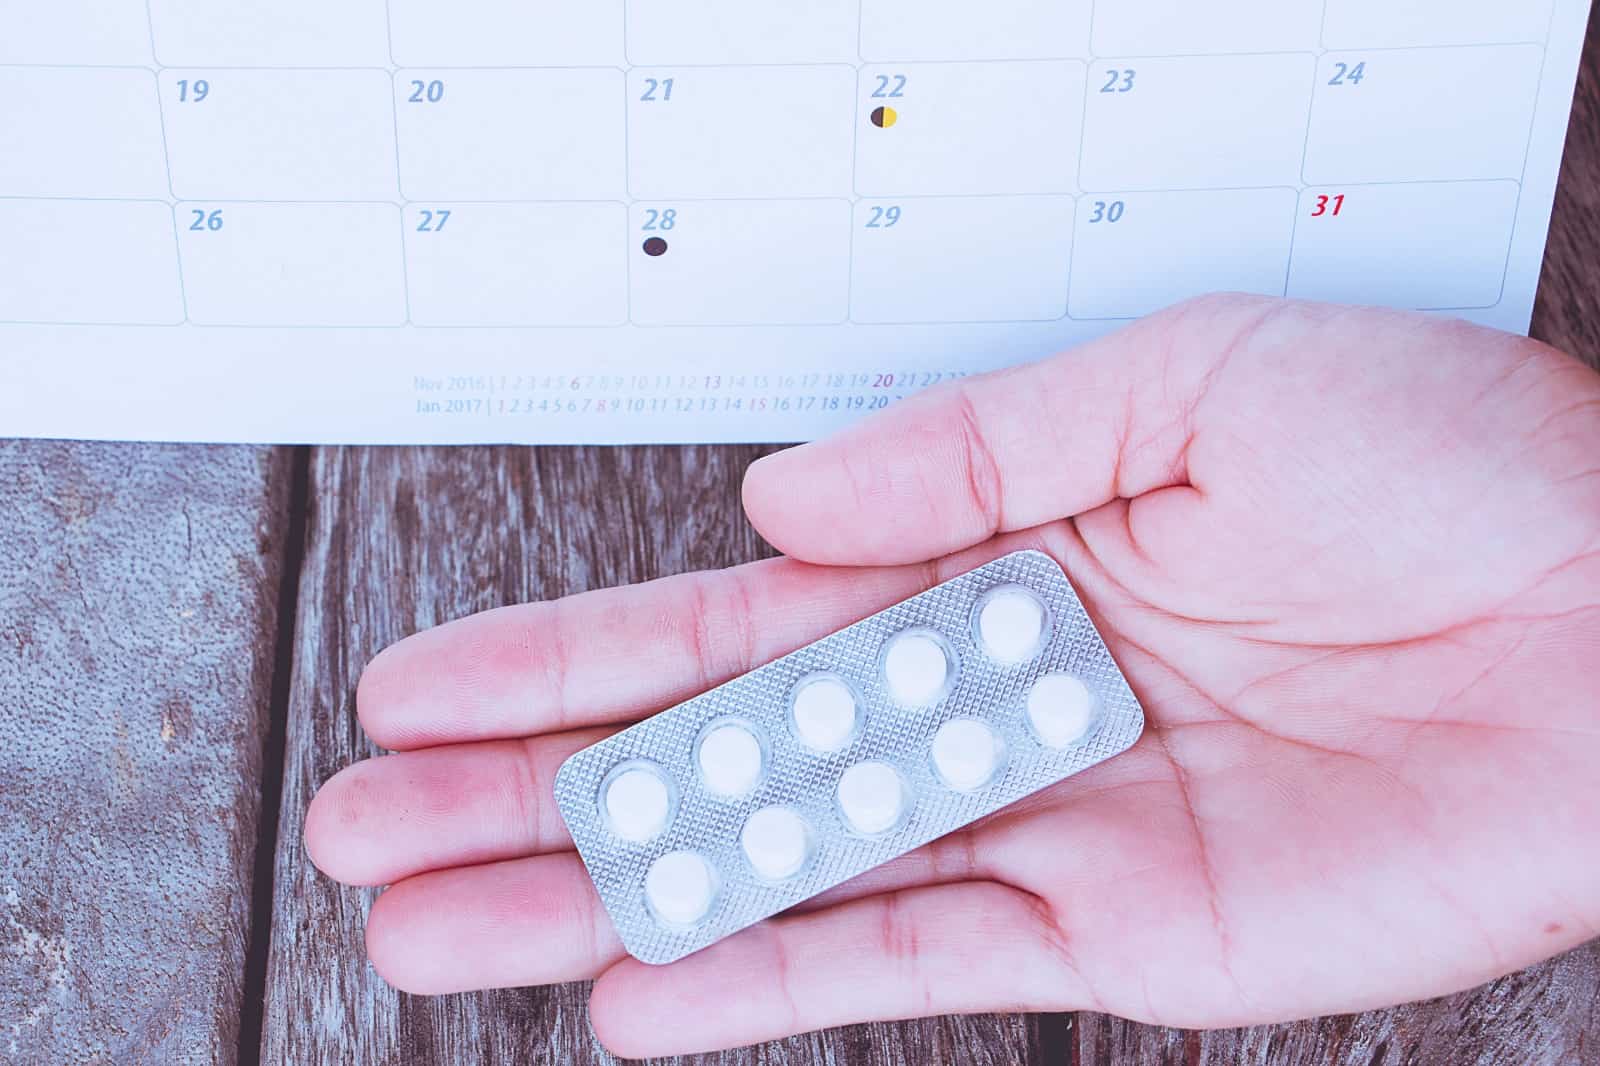 Period Delay Tablets: Safe Or Not?